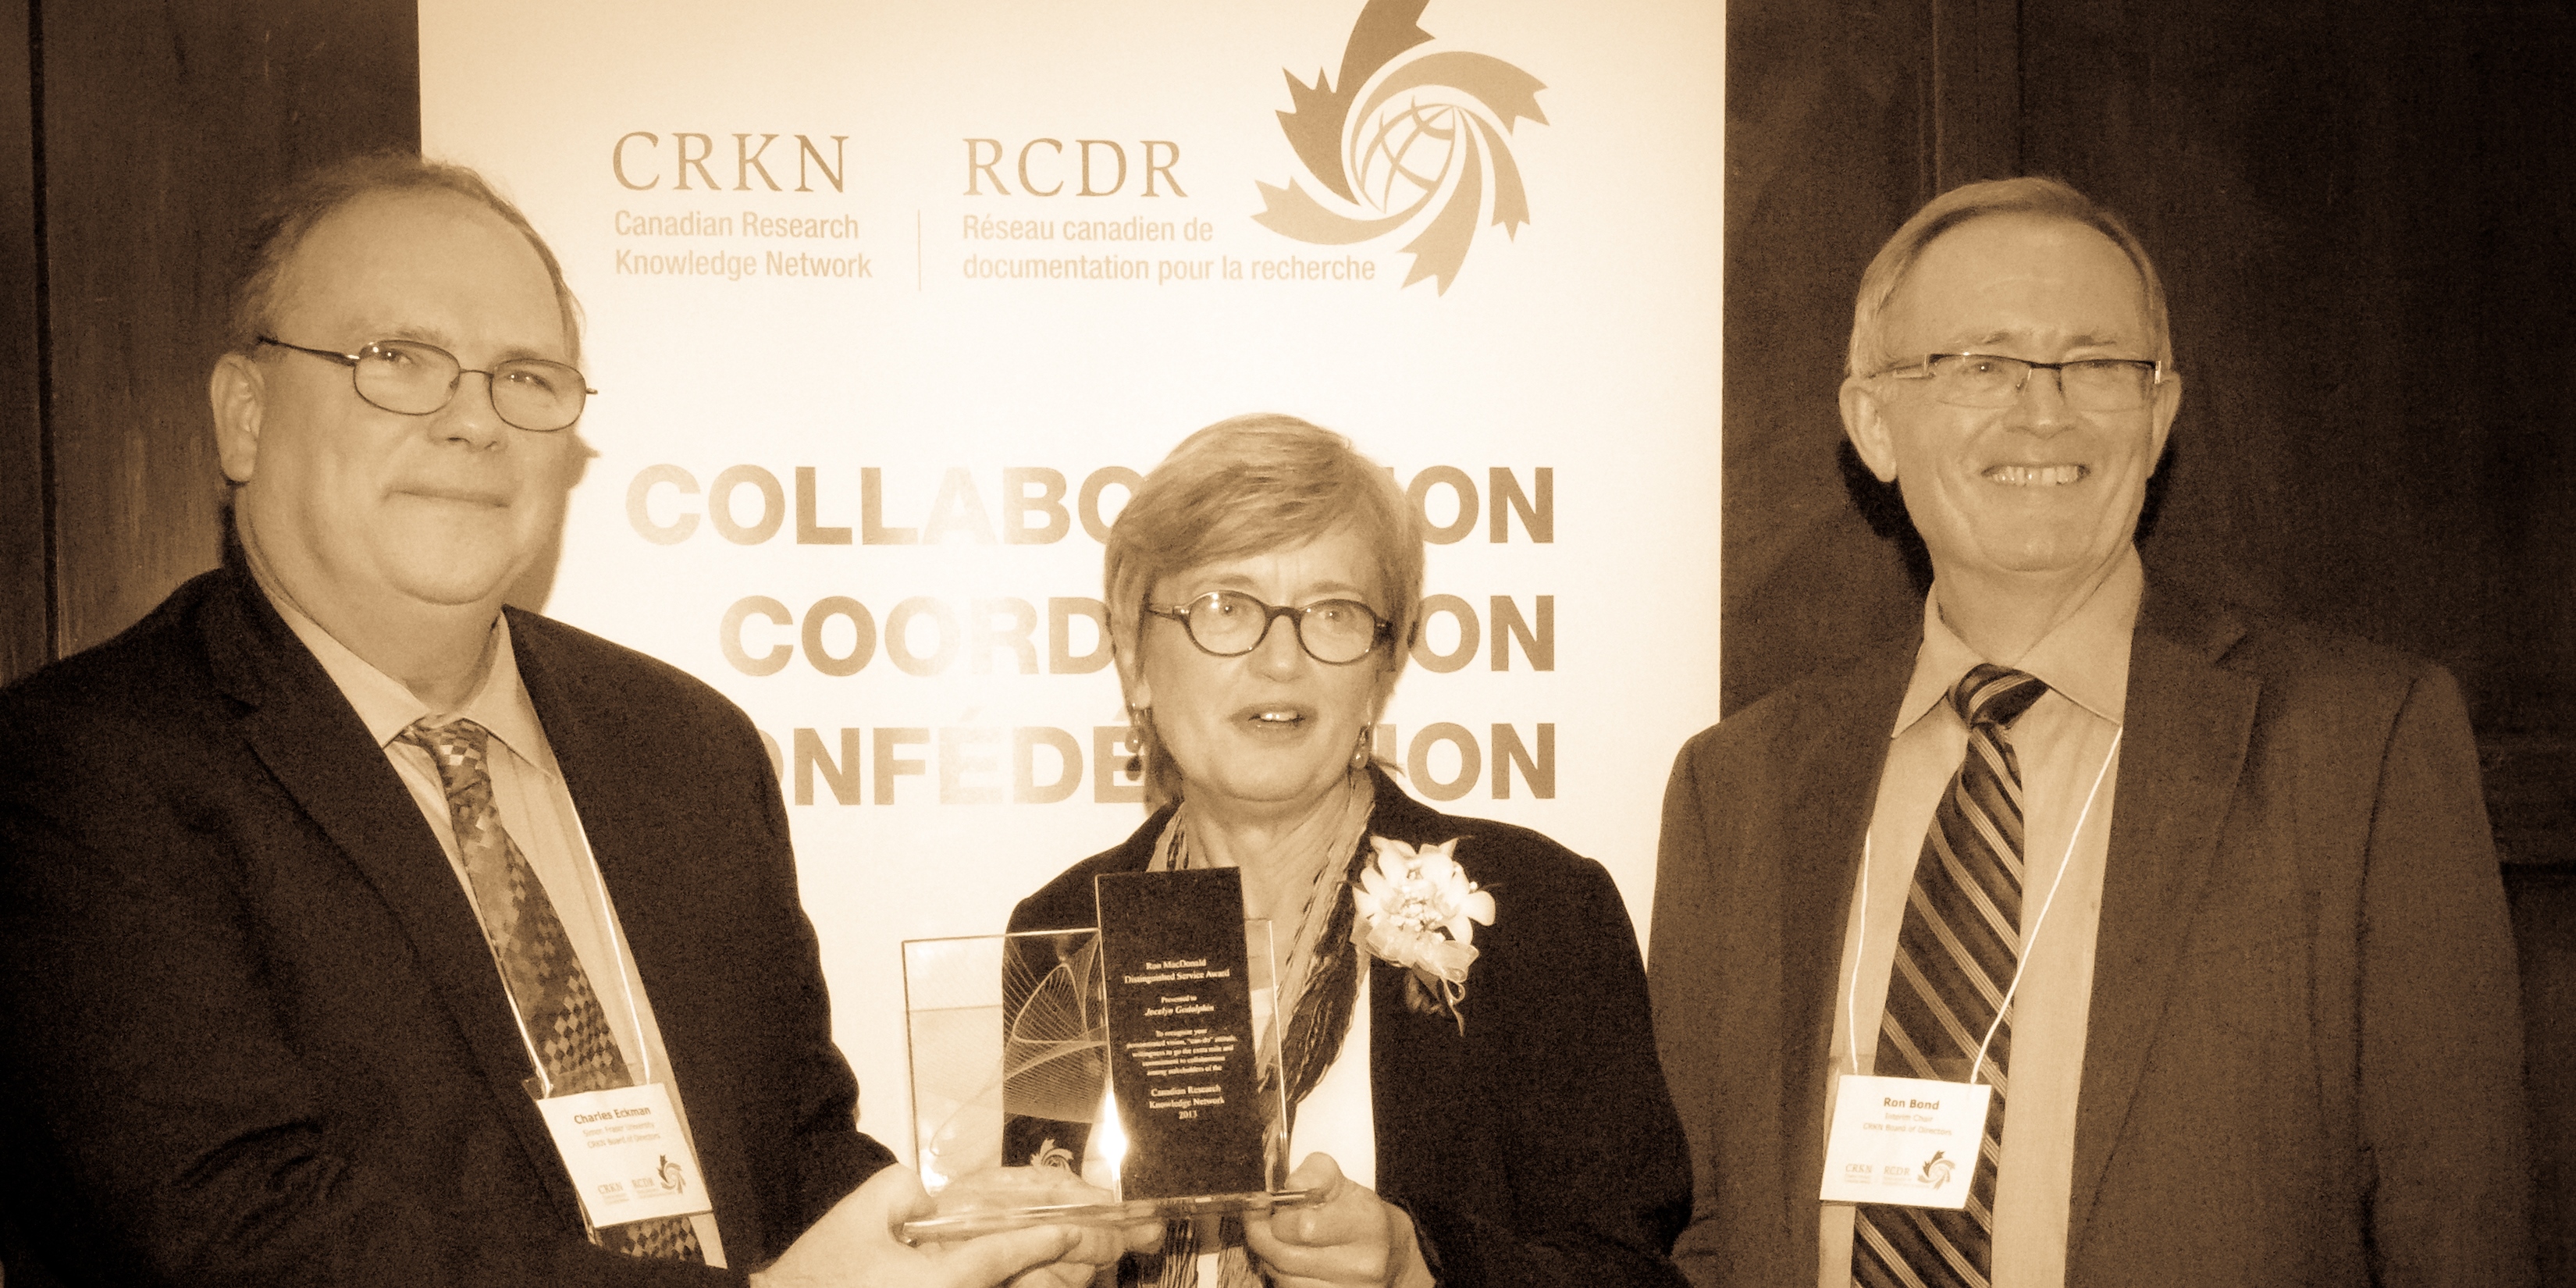 Chuck Eckman, Jocelyn Godolphin and Ron Bond at the 2013 AGM in Toronto